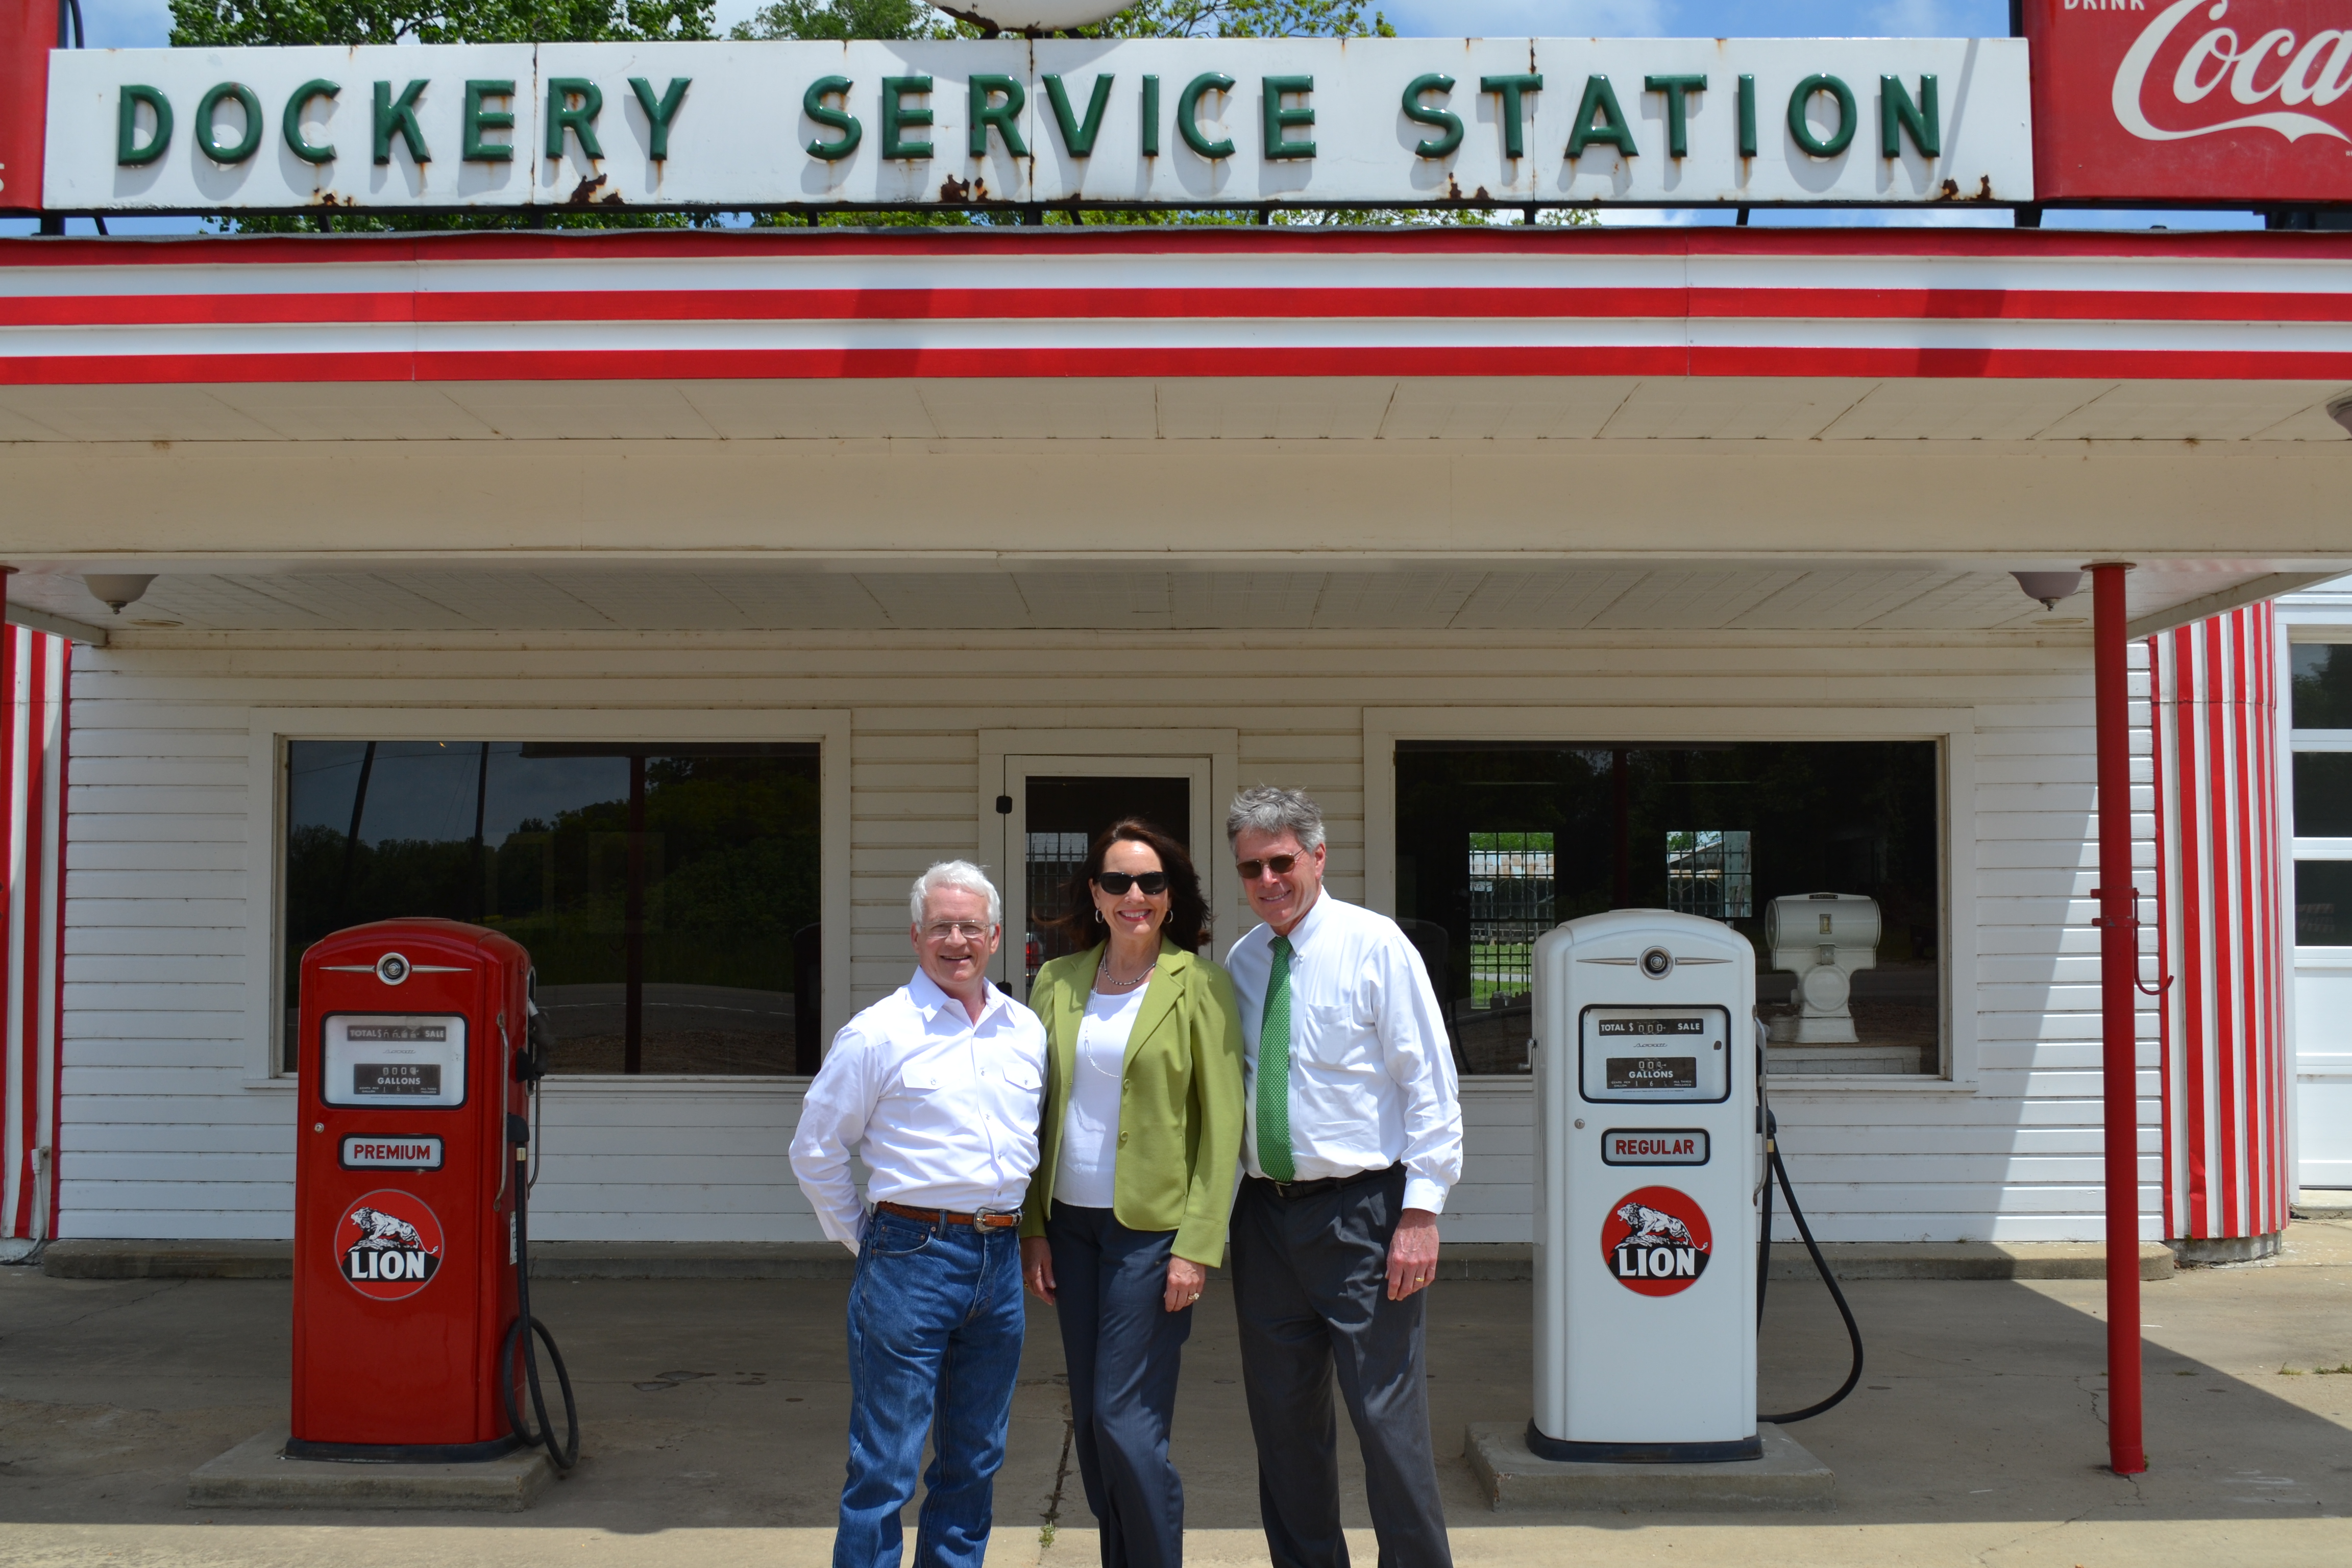  From left, Delta State Professor Emeritus of Art and Coordinator for the Dockery Farms Foundation Bill Lester, Delta State First Lady Nancy LaForge and Delta State President William N. LaForge in front of the history Dockery Service Station.